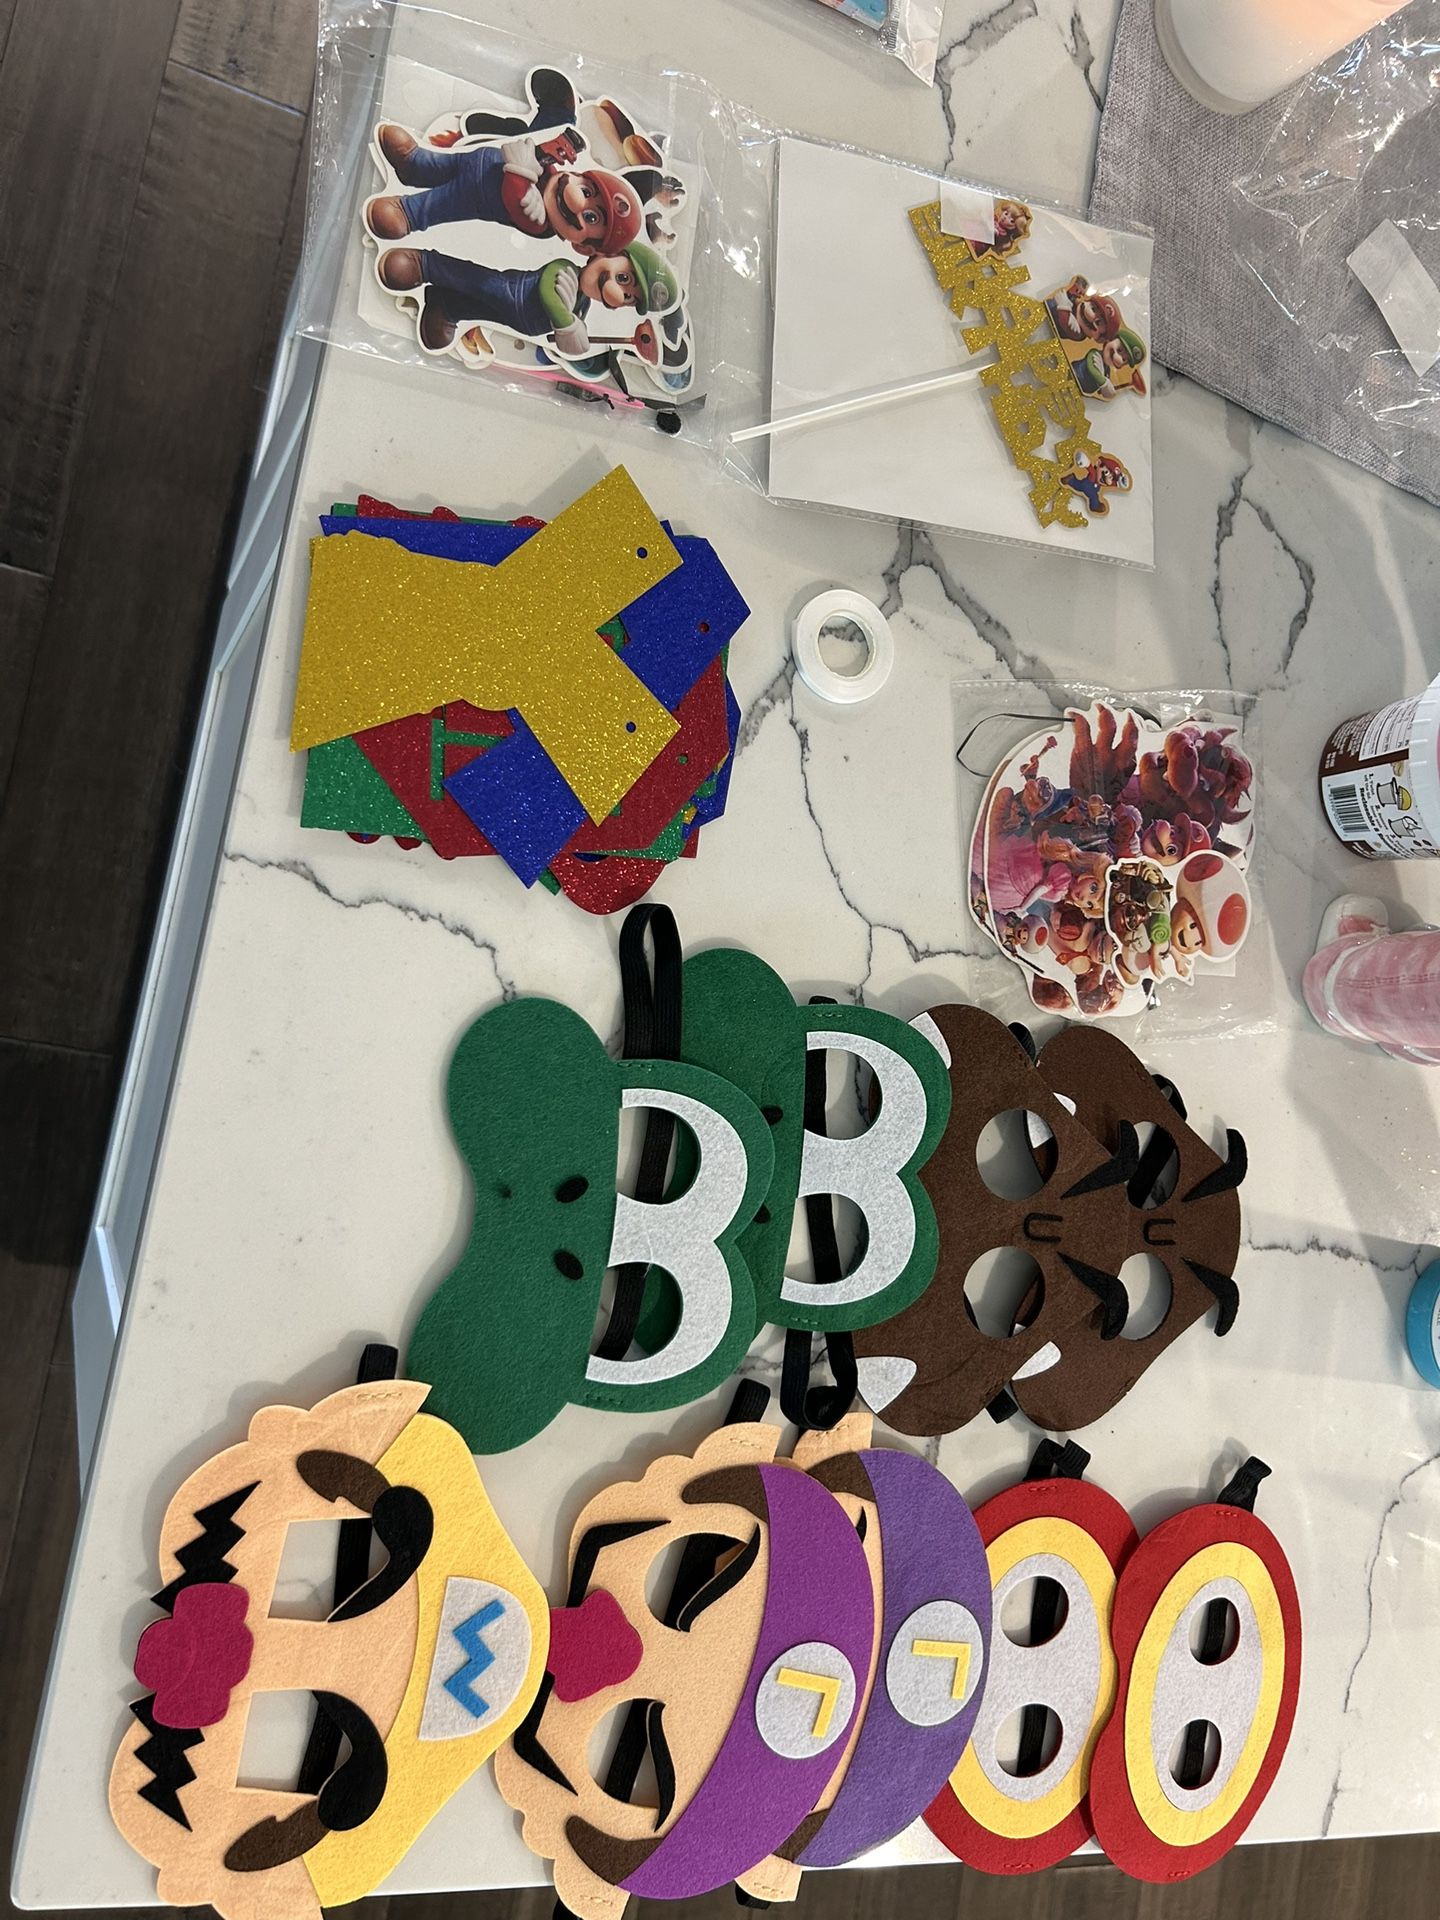 mario brothers happy birthday banner and other items